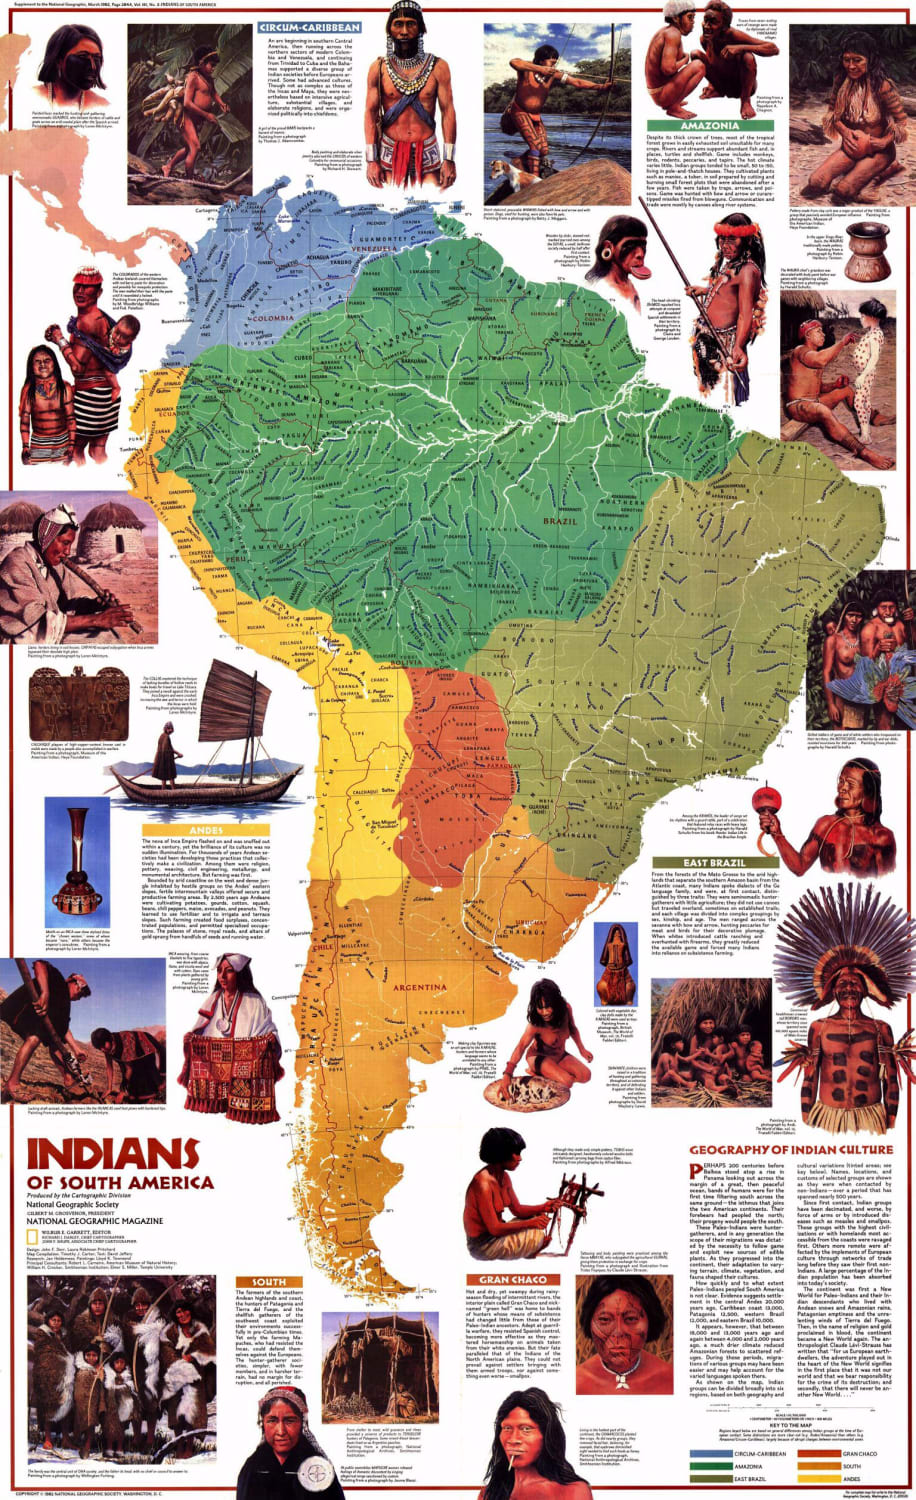 Indians of South America (pre-columbian)